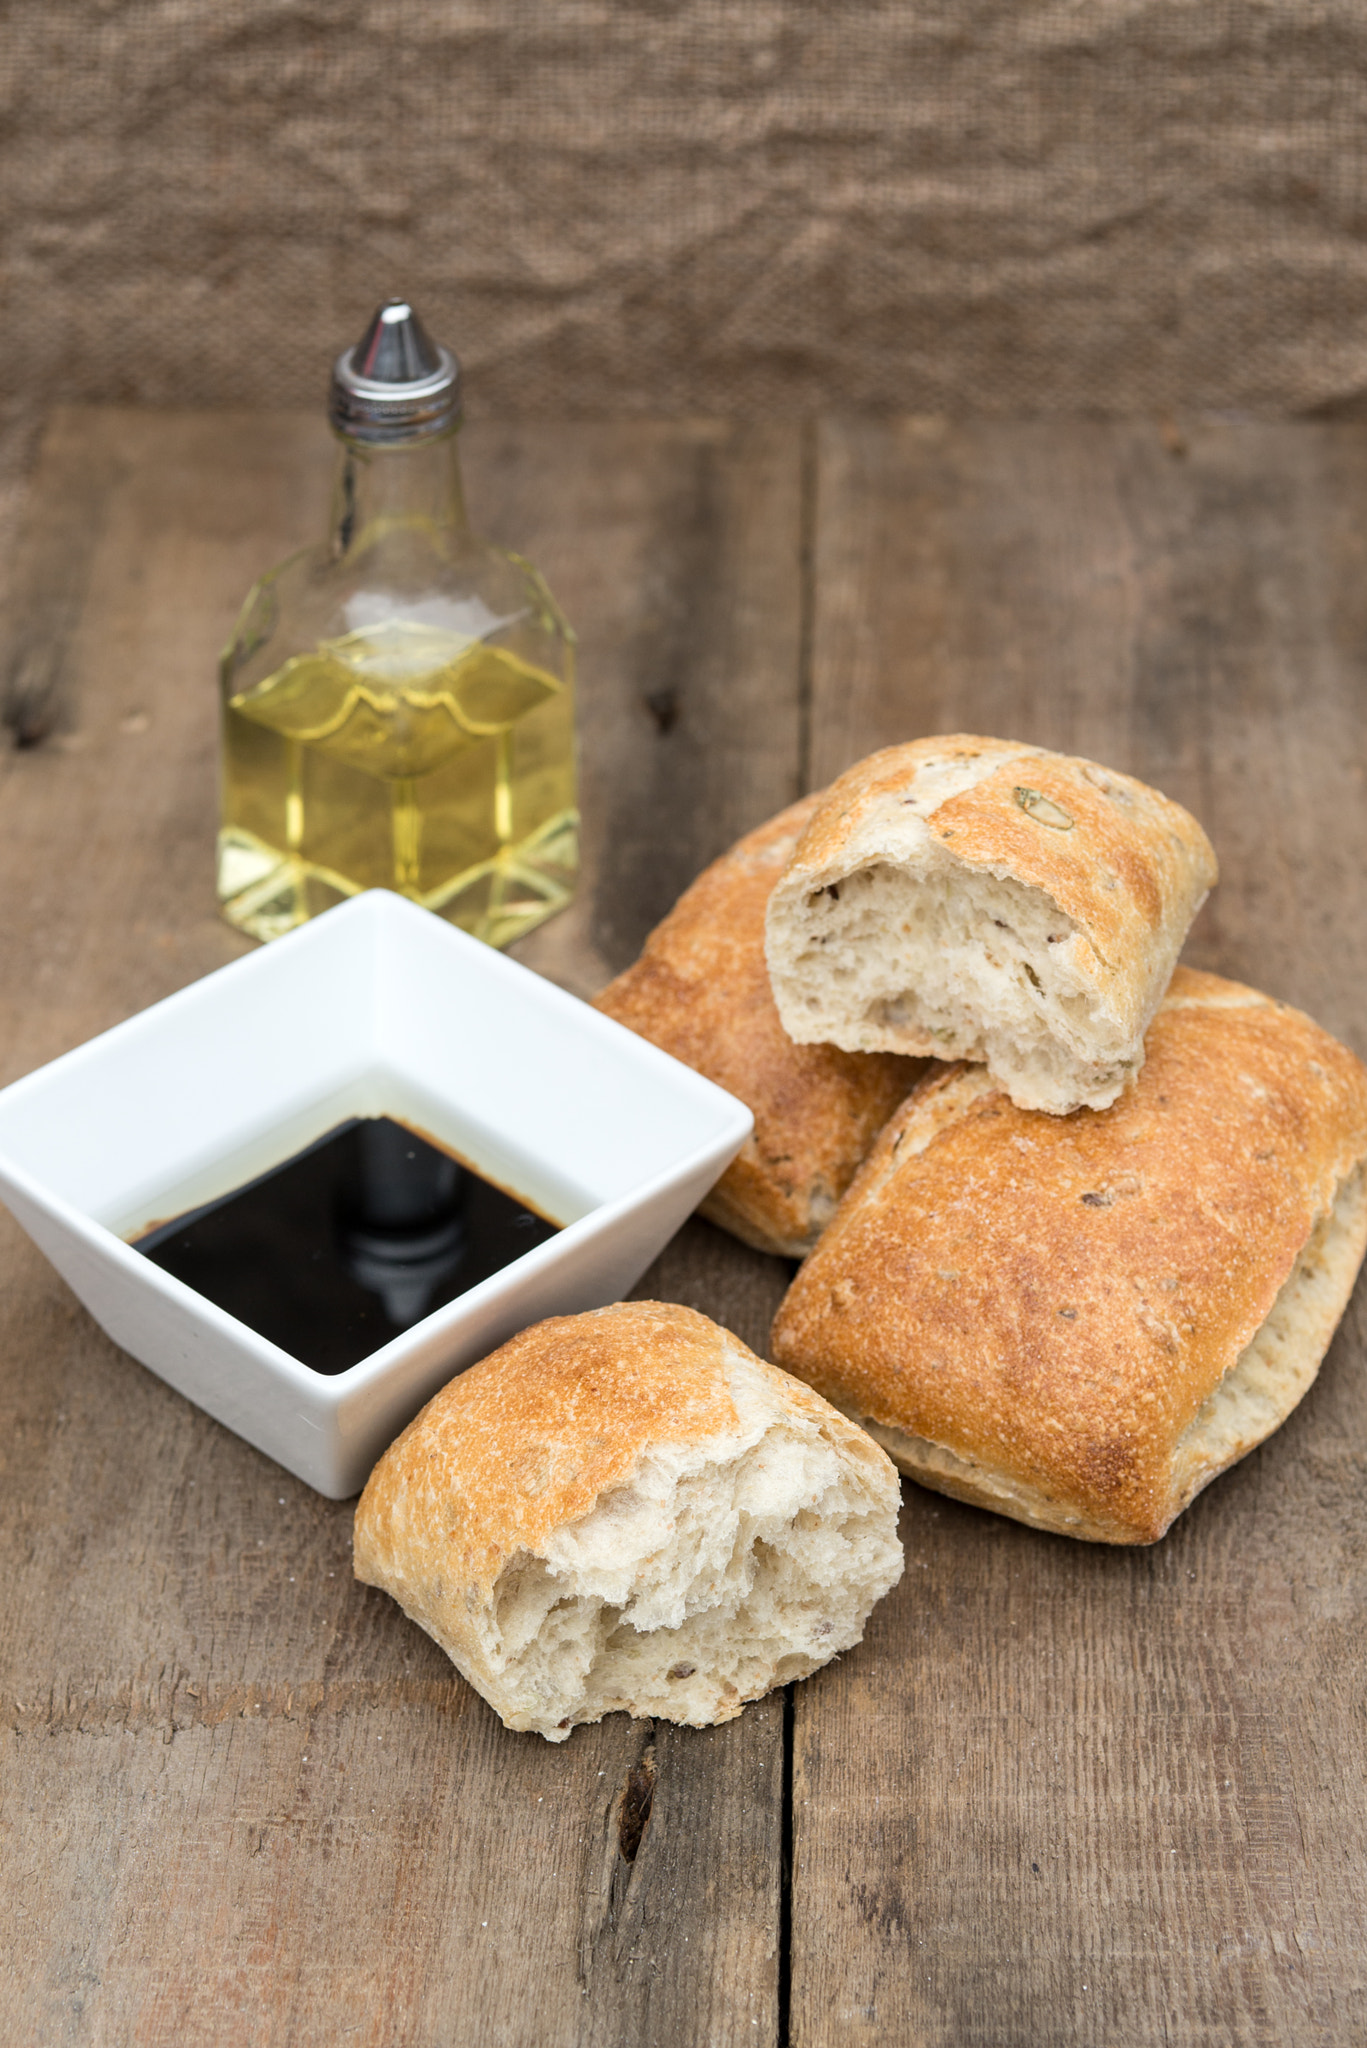 Nikon D600 + Sigma 105mm F2.8 EX DG Macro sample photo. Olive bread rollis in rustic kitchen setting with utensils photography